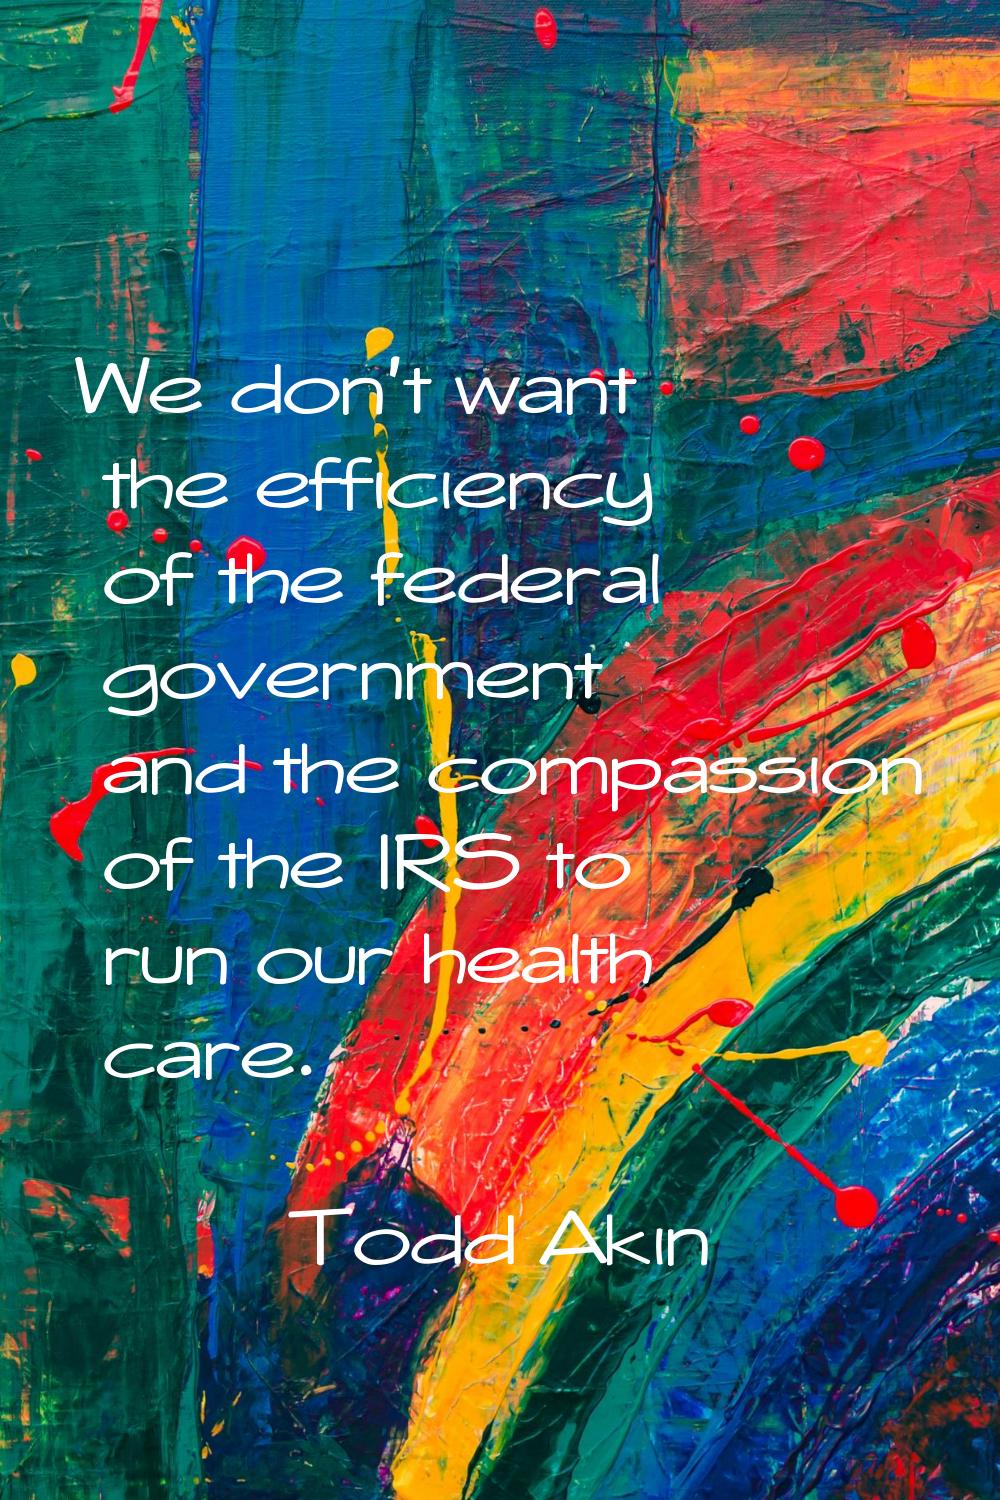 We don't want the efficiency of the federal government and the compassion of the IRS to run our hea